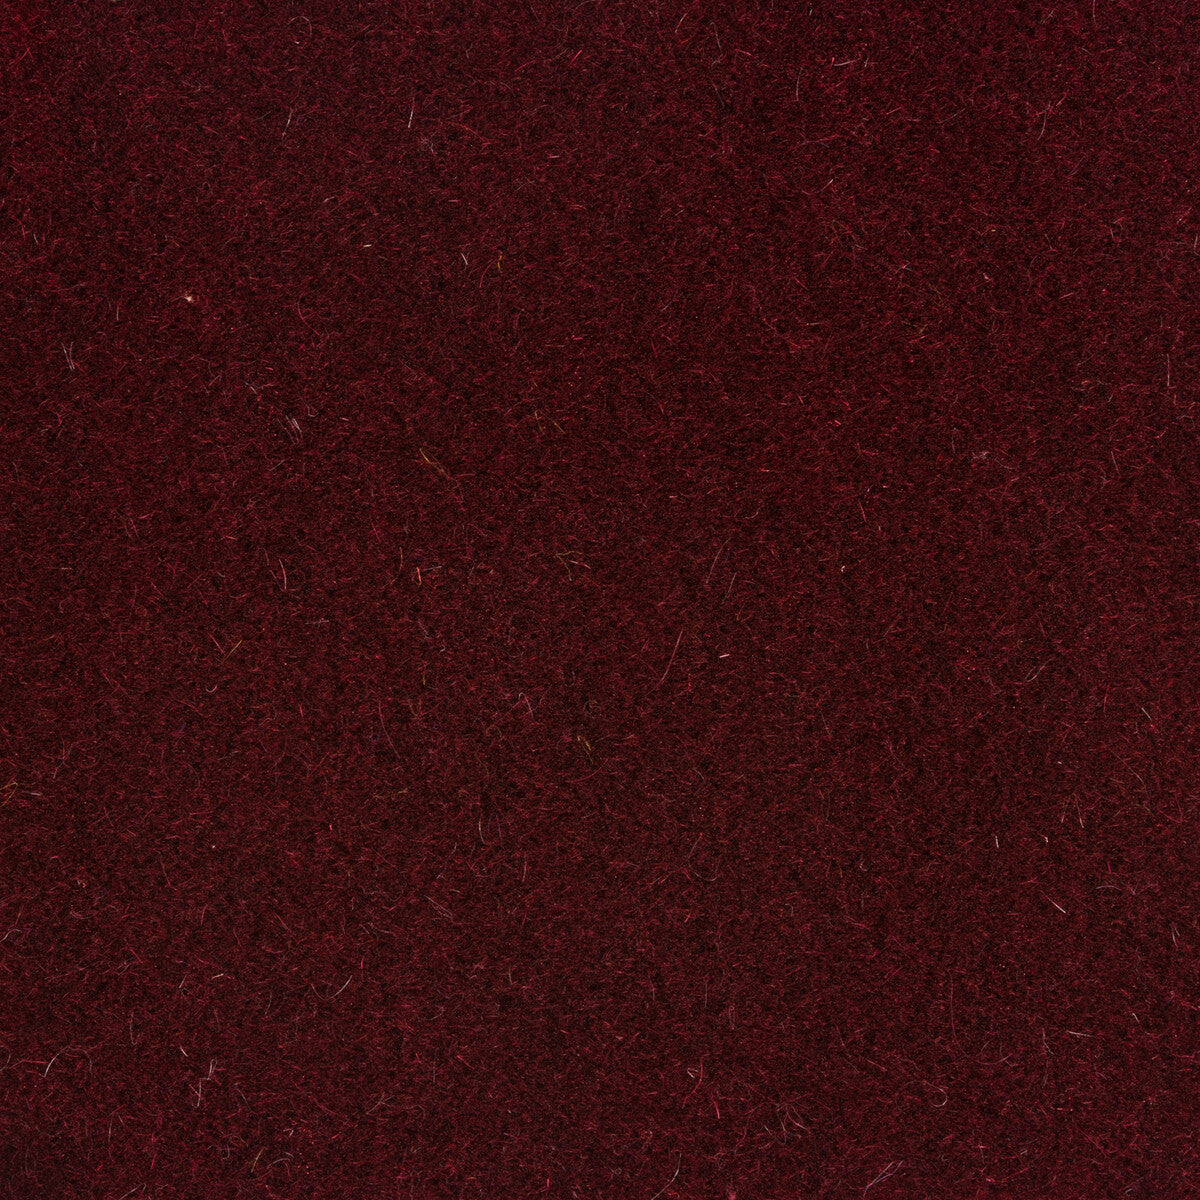 Bachelor Mohair fabric in raisin color - pattern 8014101.910.0 - by Brunschwig &amp; Fils